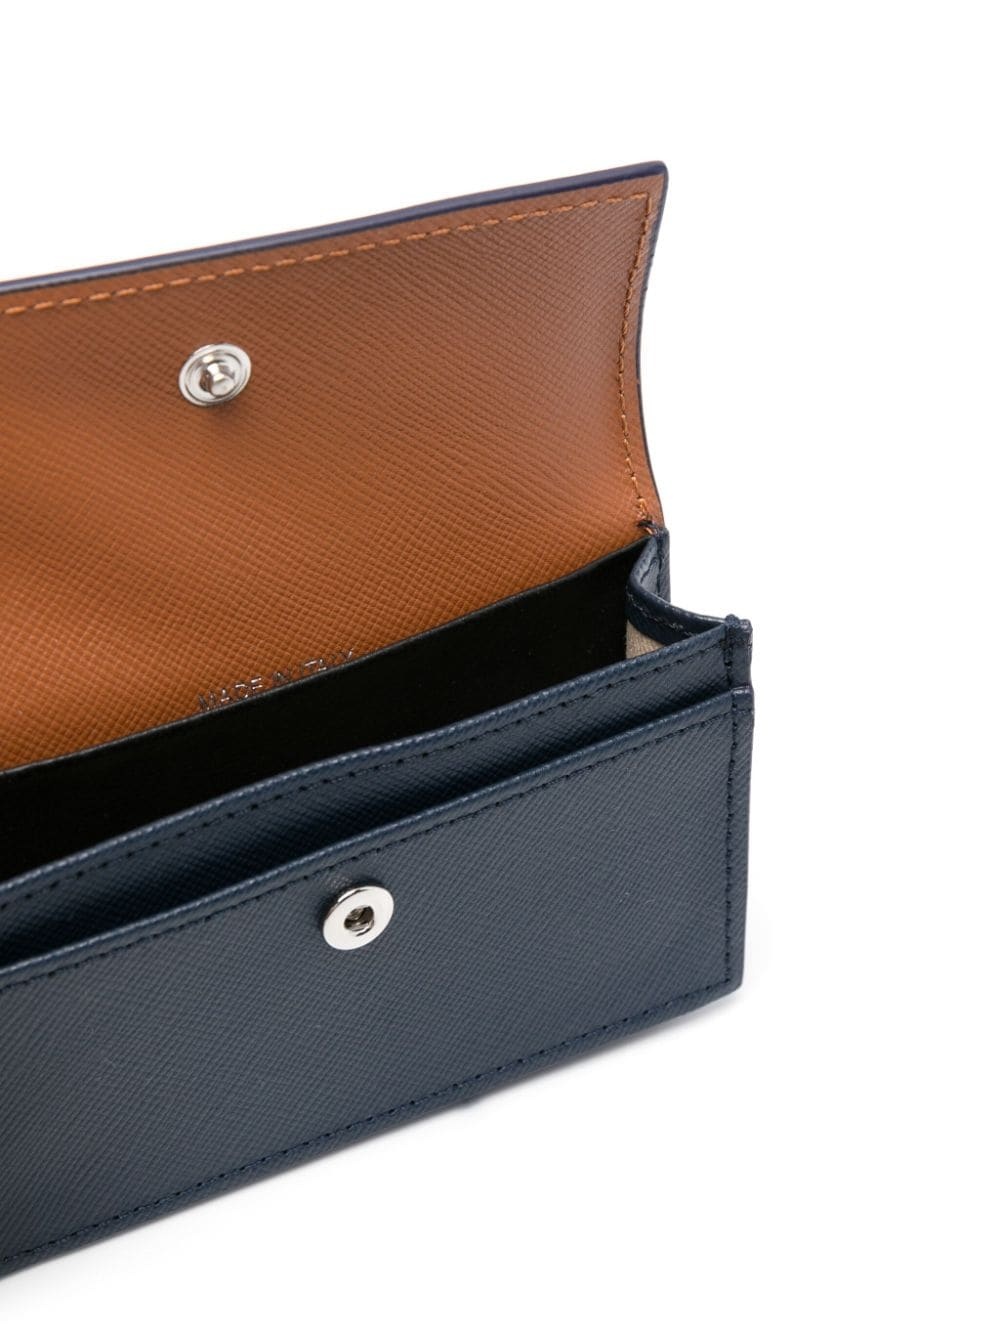 Business leather wallet - 3